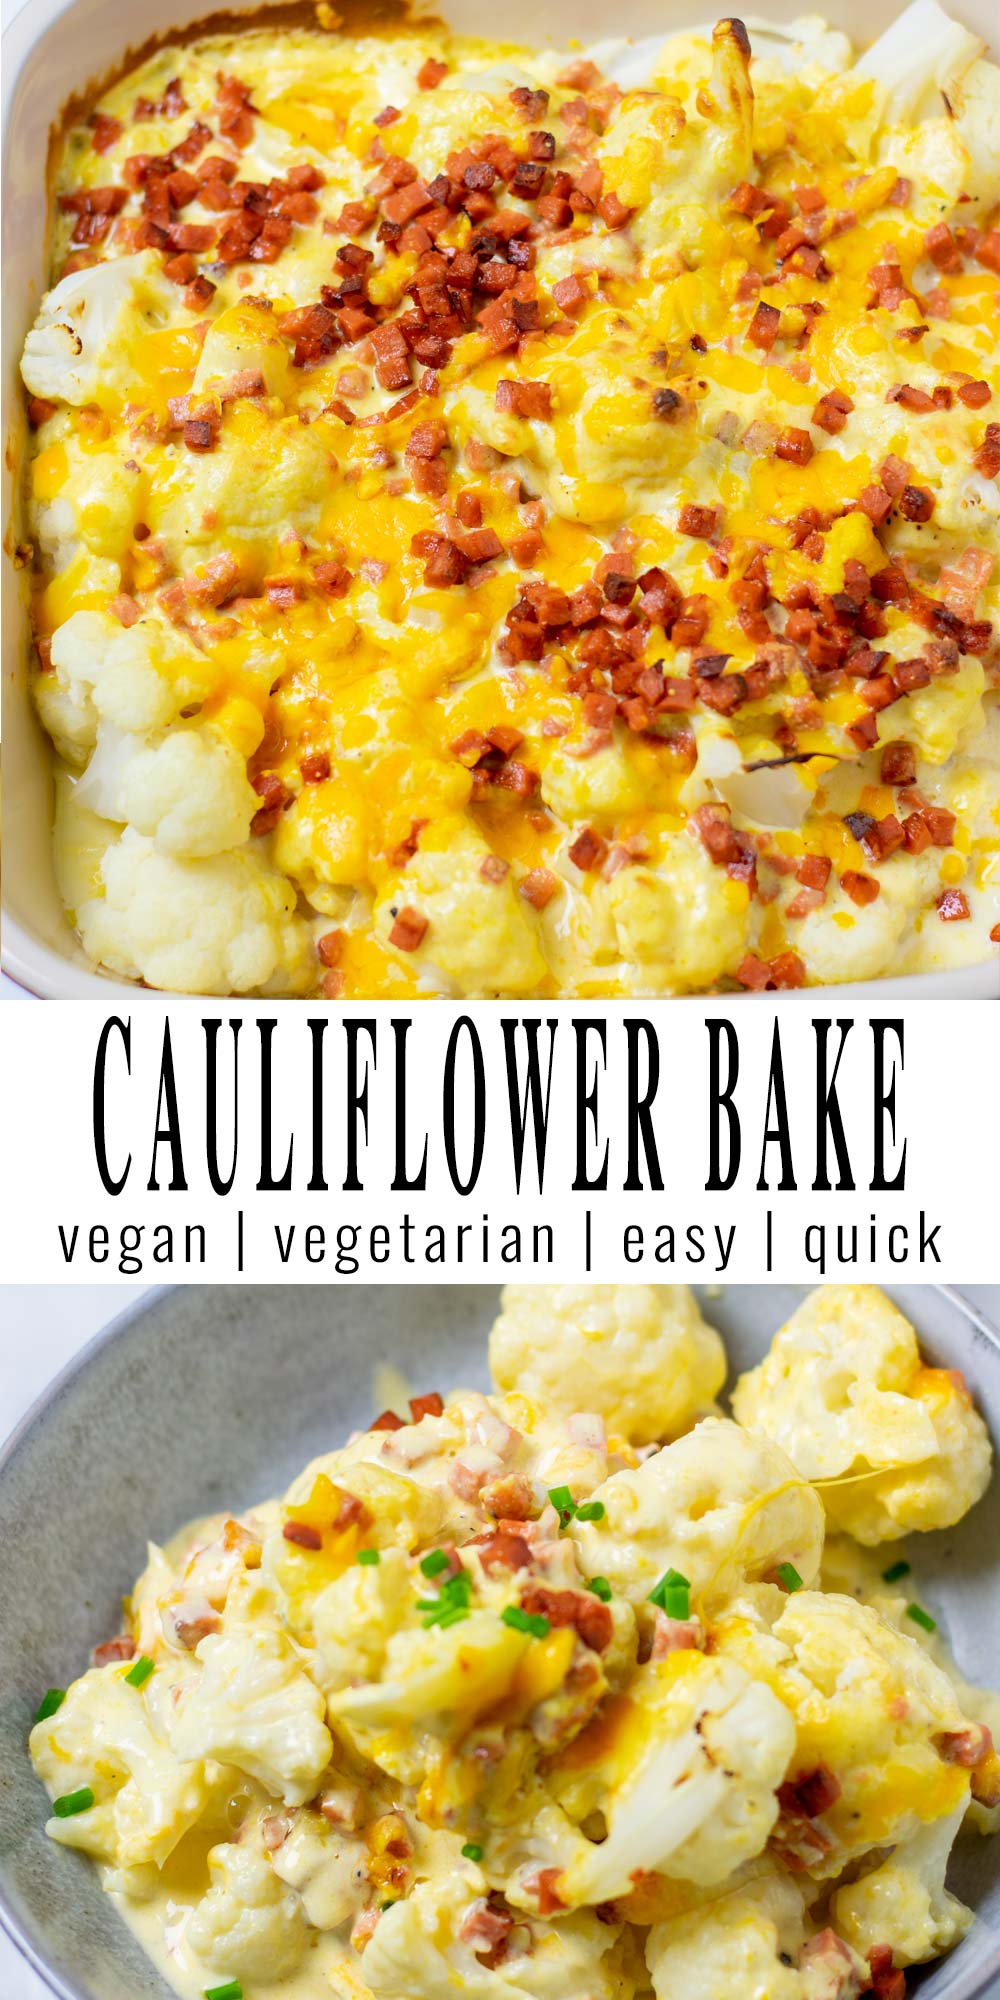 Collage of two pictures of the Cauliflower Bake with recipe title text in the center.